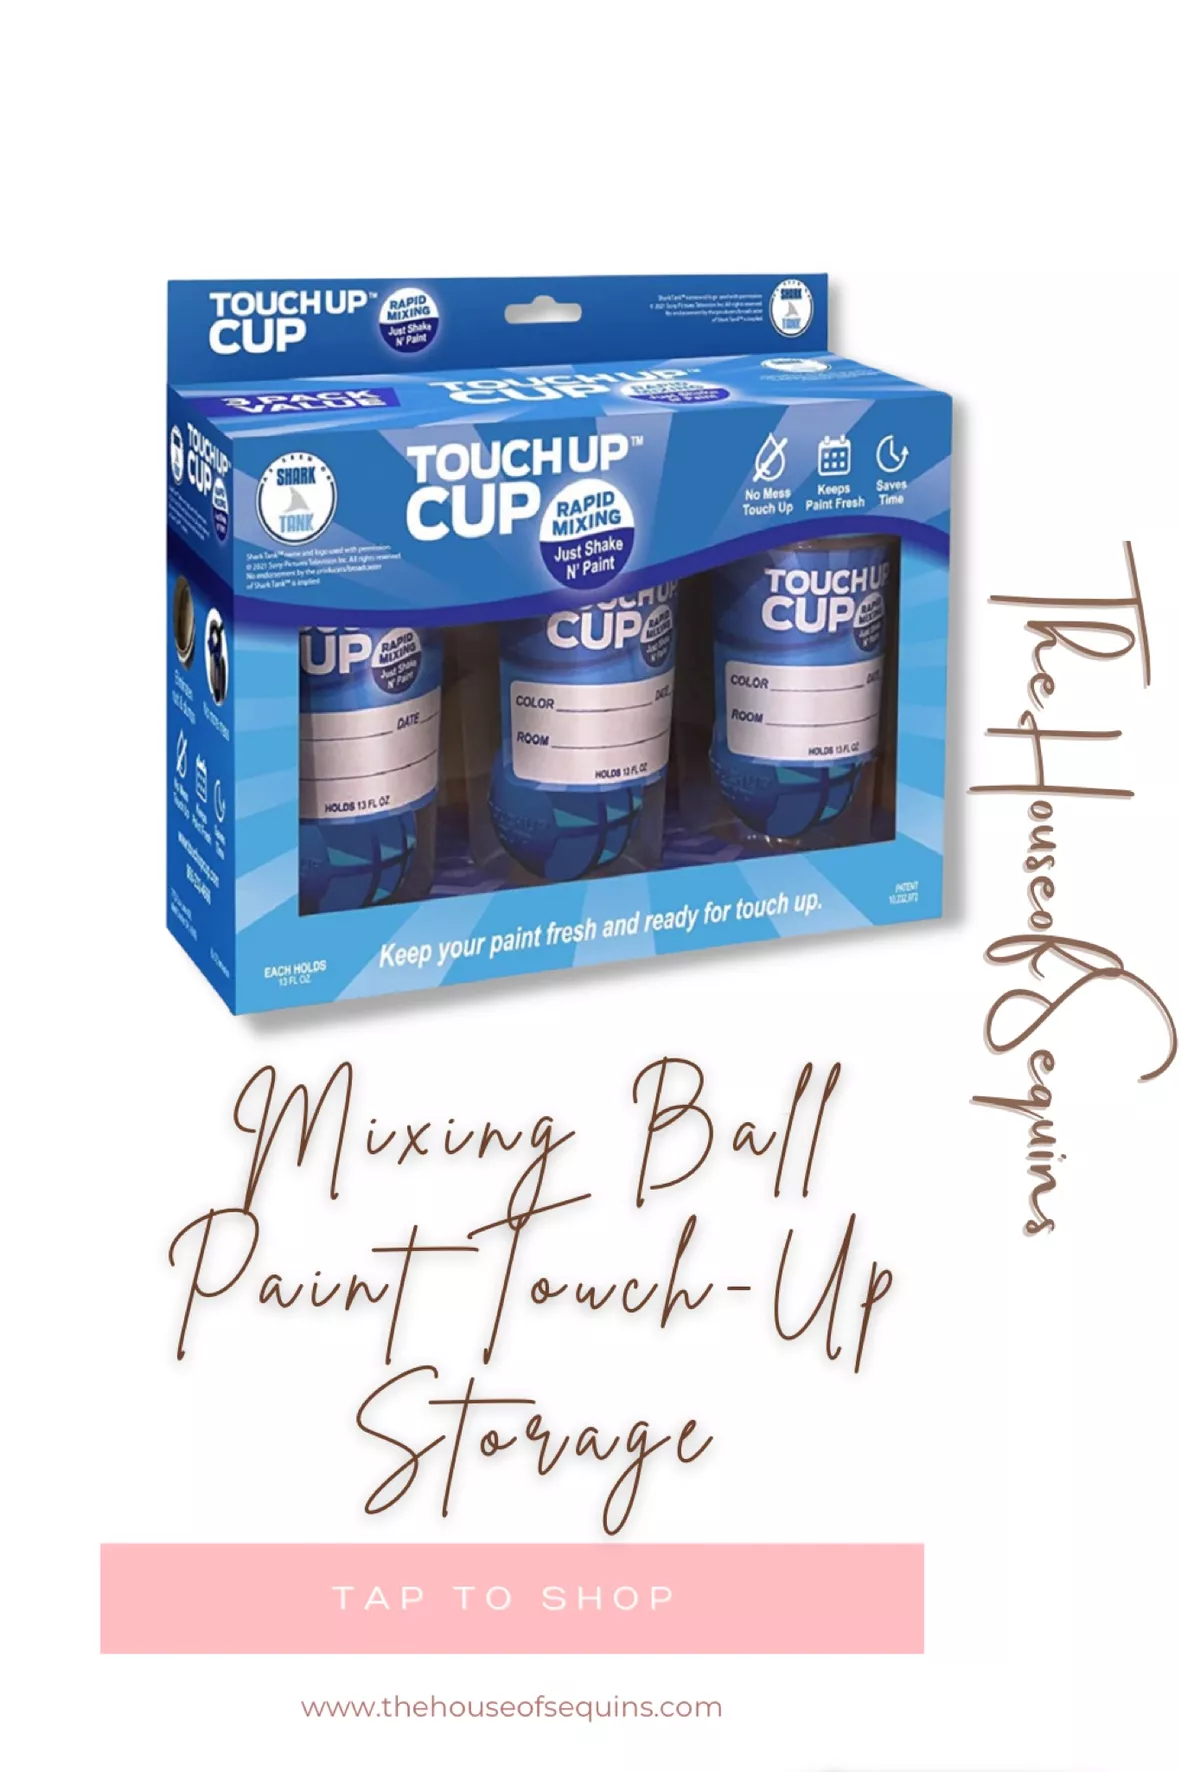 Touch Up Cup Empty Plastic Paint Storage Containers with Lids for Leftover  Paint, Touch Ups, As Seen On Shark Tank Products, 13 oz, Pack of 3 